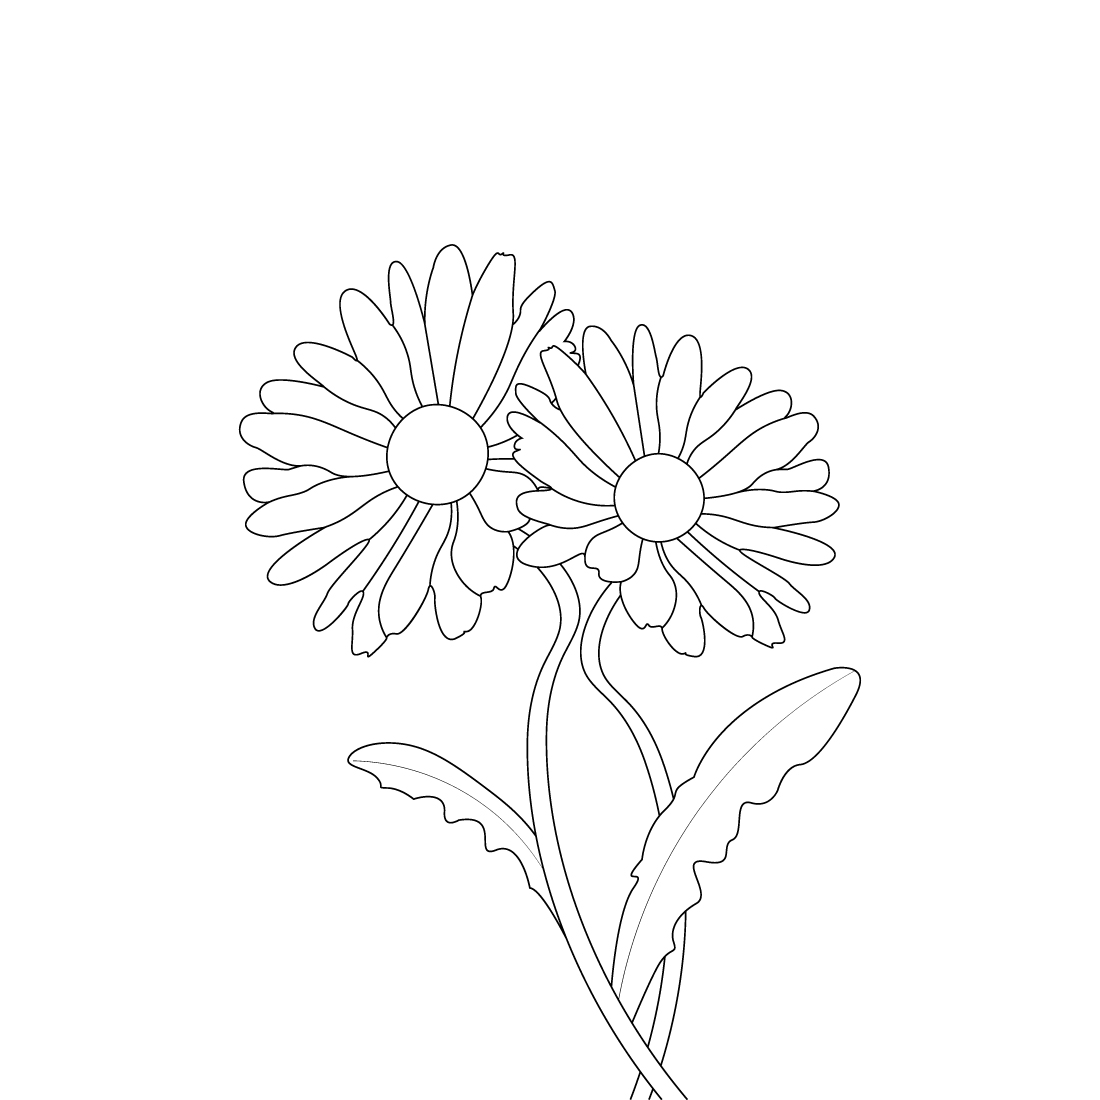 Daisy Flower Coloring Book Adults cover image.